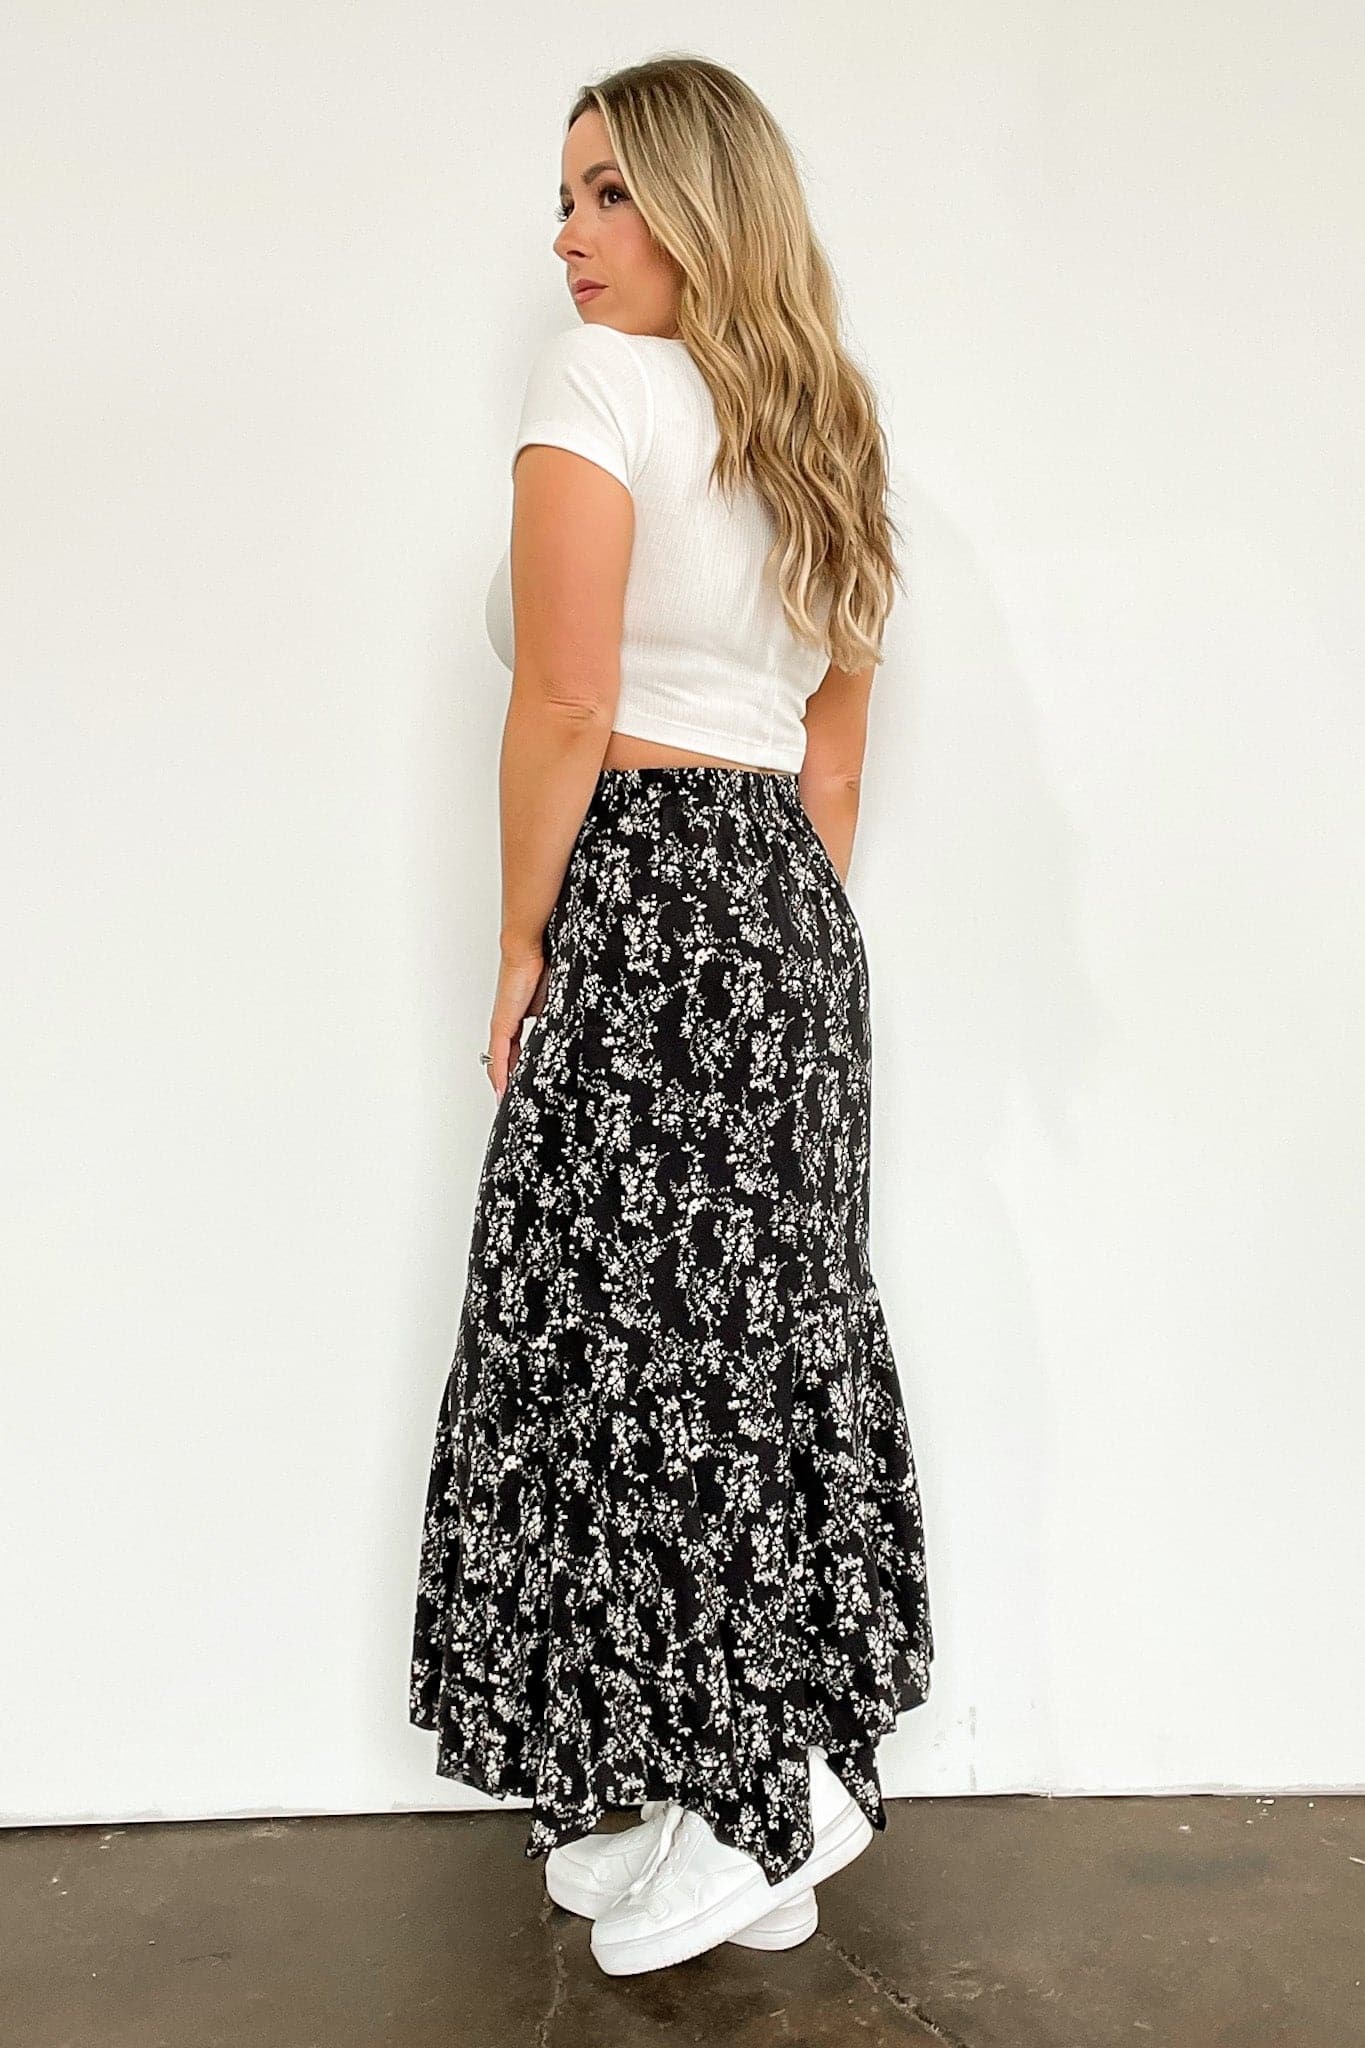  Buy Me Flowers Flowy Floral Ruffle Skirt - FINAL SALE - Madison and Mallory